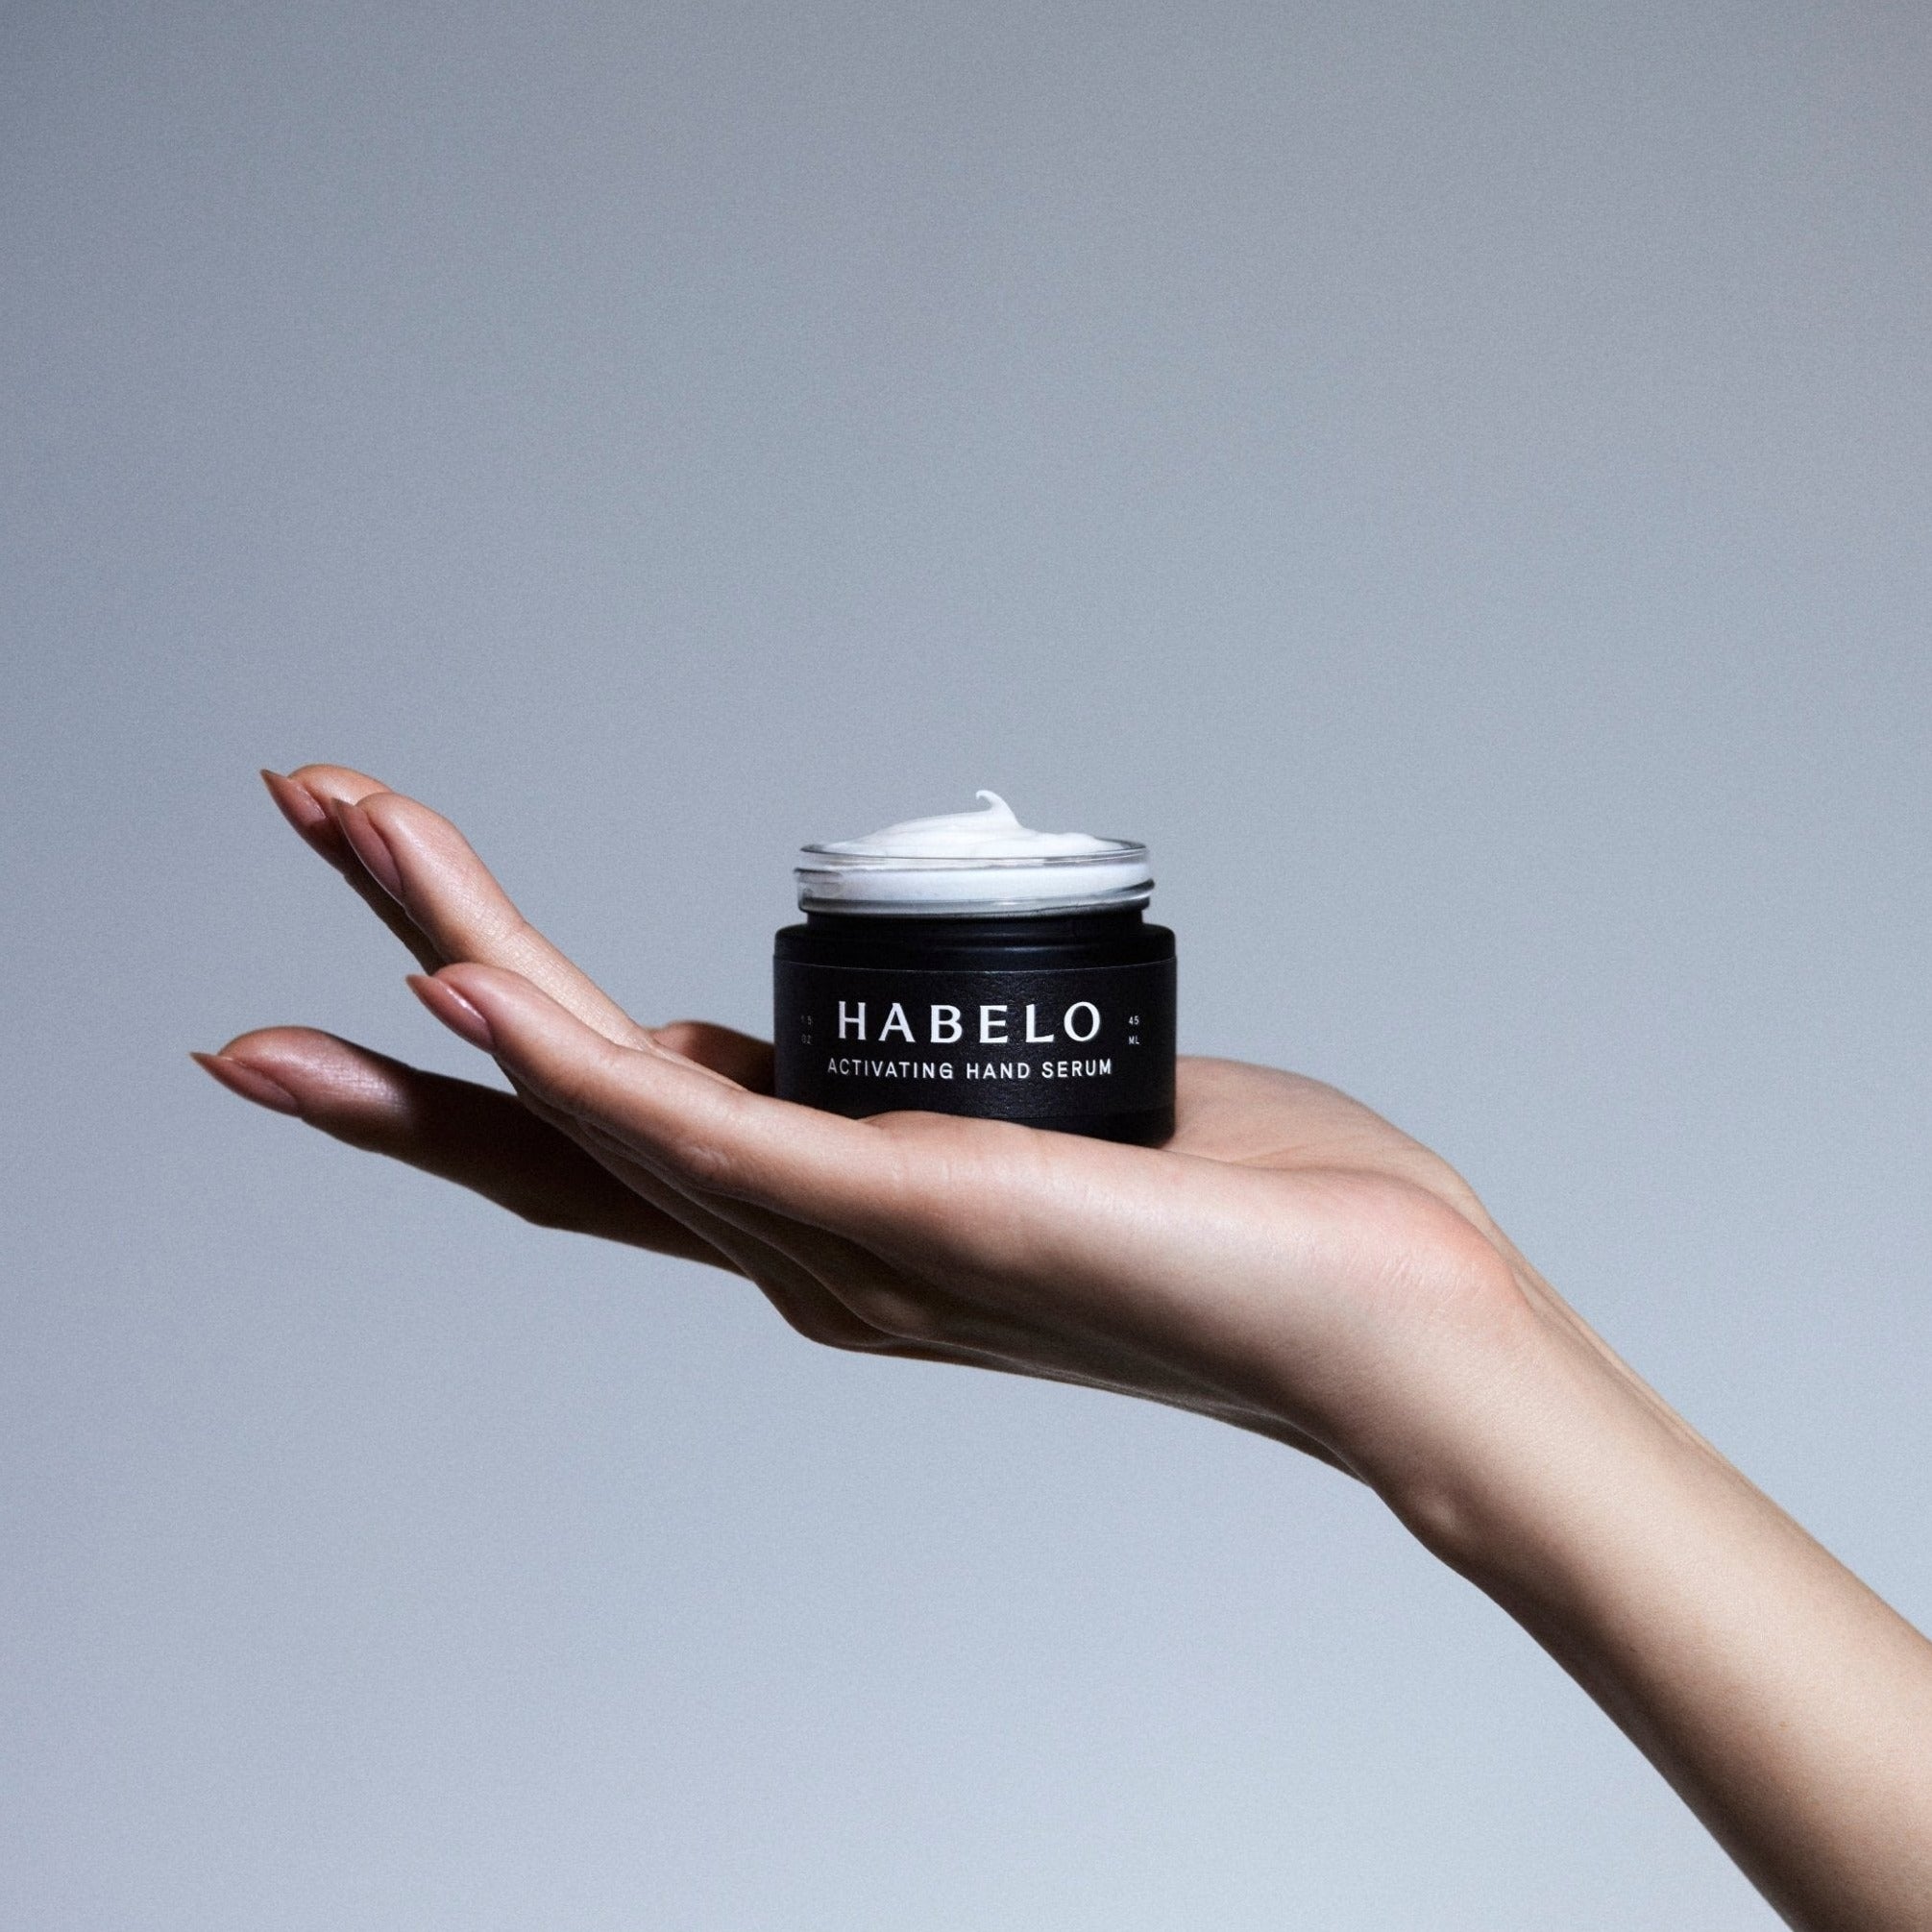 A hand holding an open jar of Habelo Activating Hand Serum